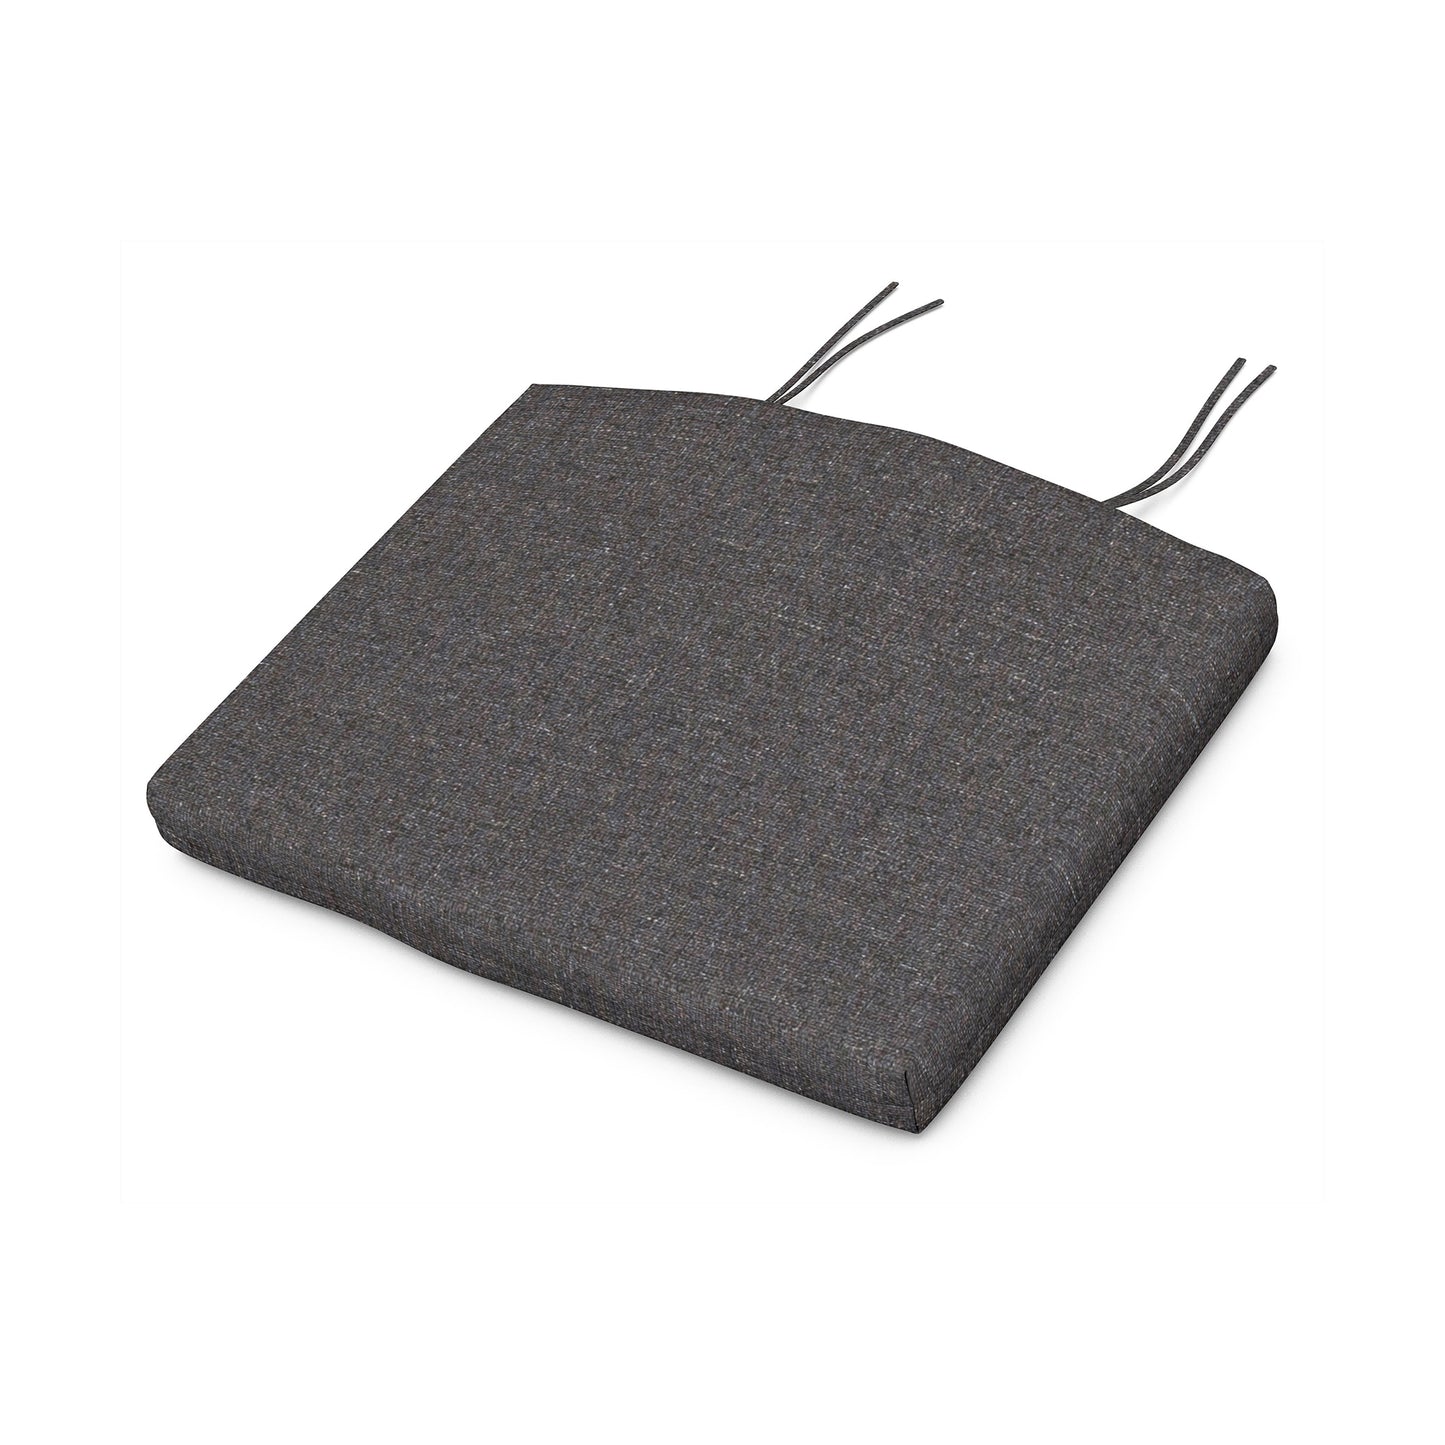 POLYWOOD XPWS0003 - Seat Cushion in gray weather-resistant upholstery fabric, with two tie-back straps, displayed on a white background.